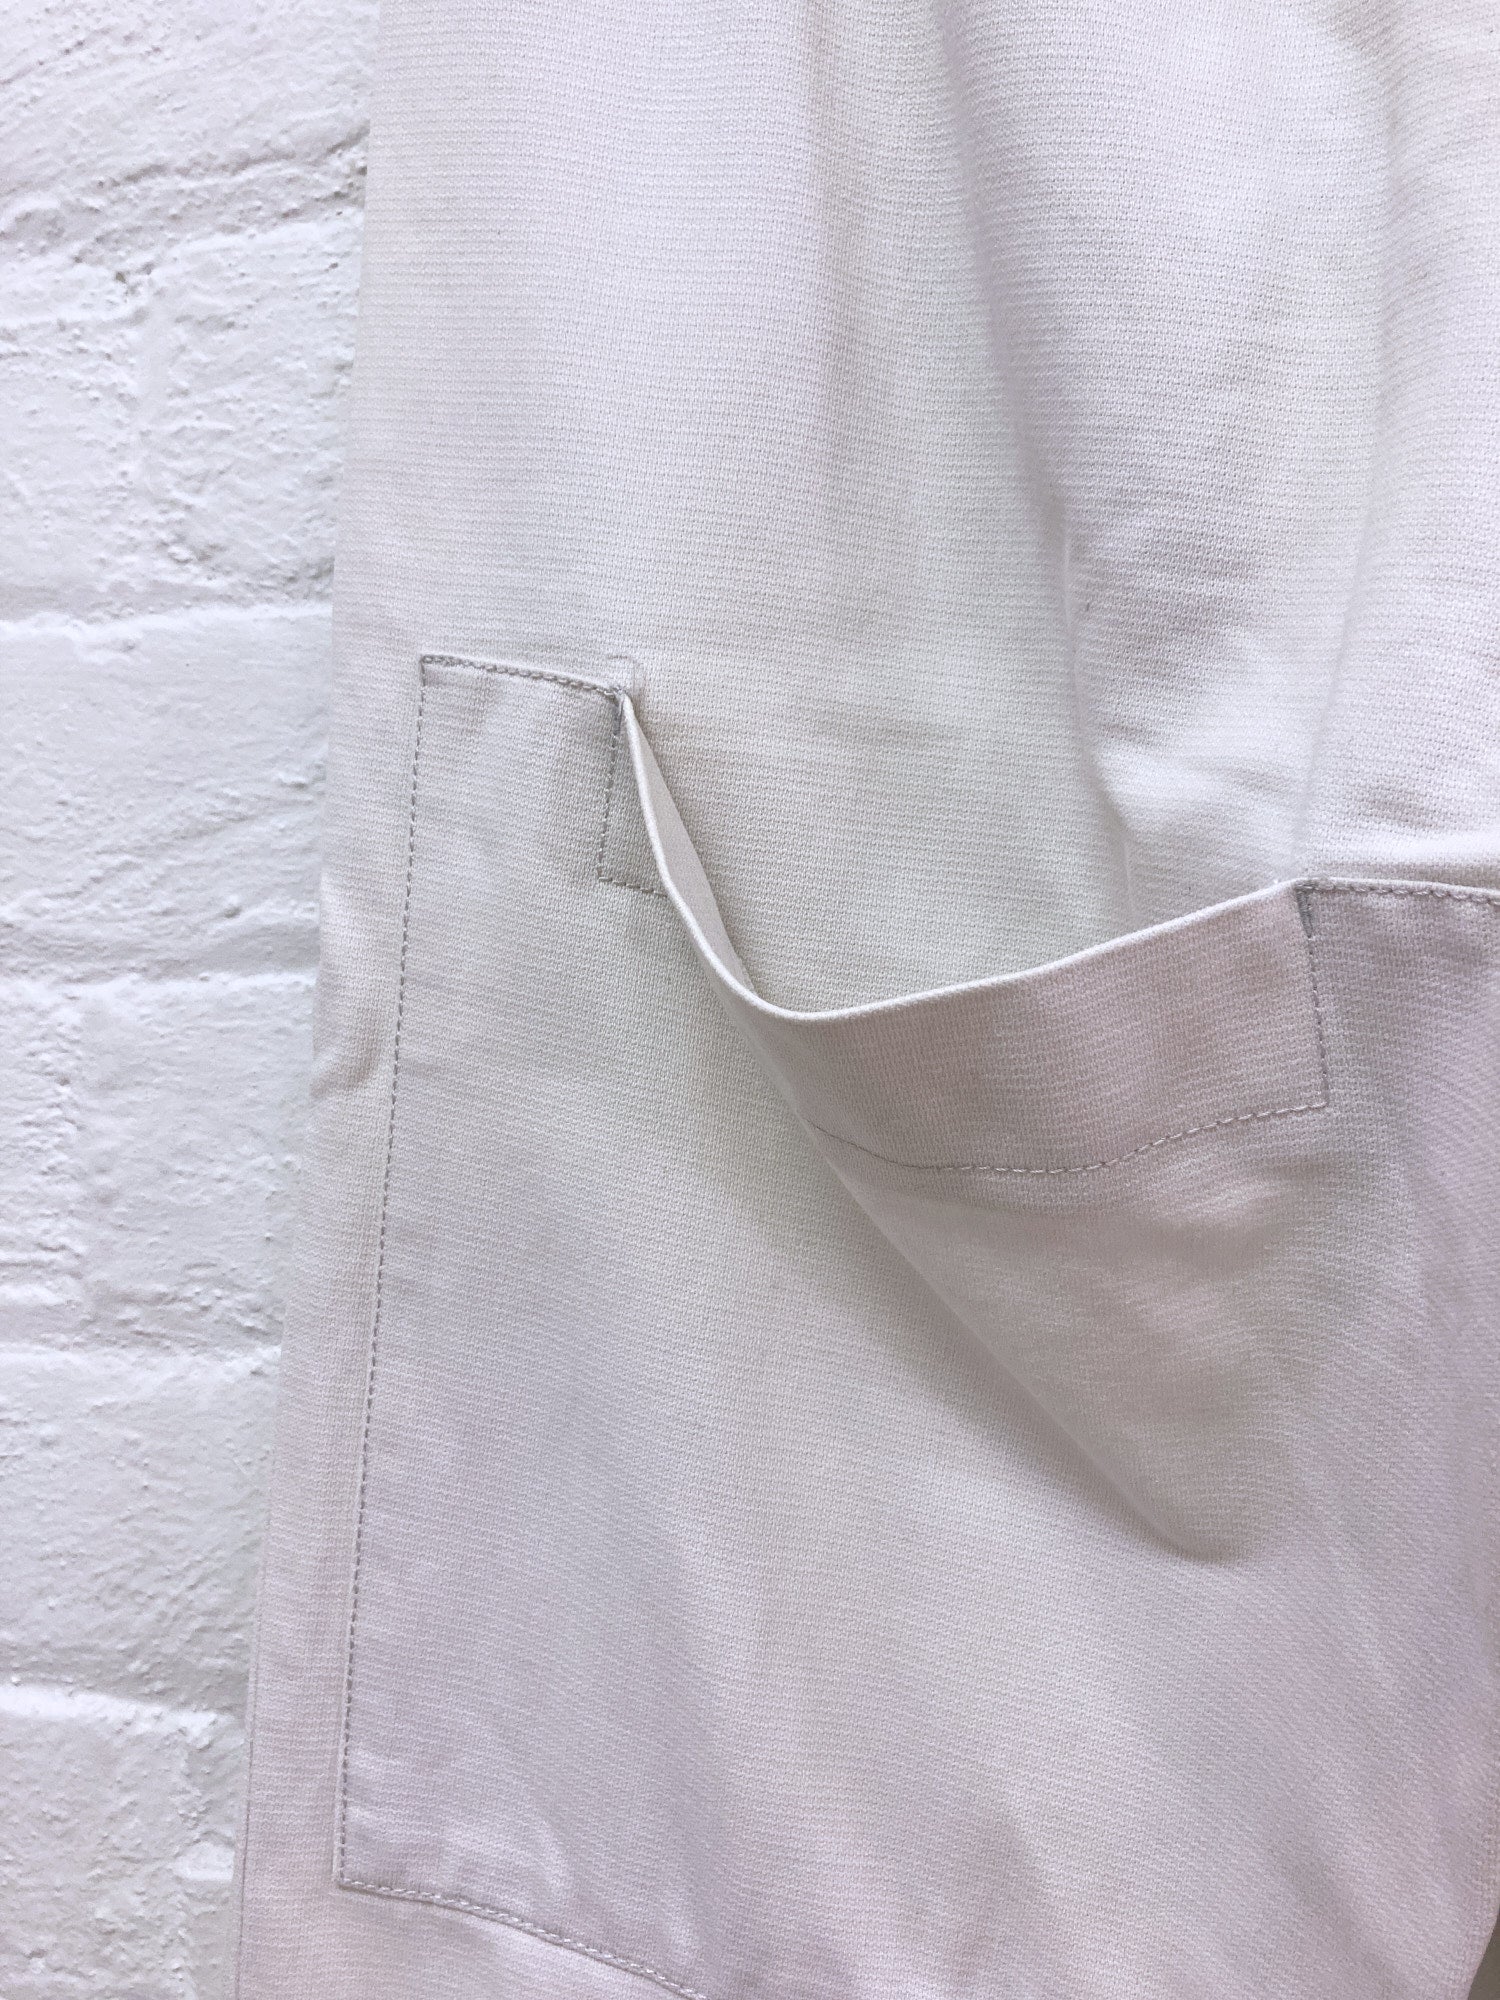 Dirk Bikkembergs off-white cotton trousers with back thigh pockets - mens S